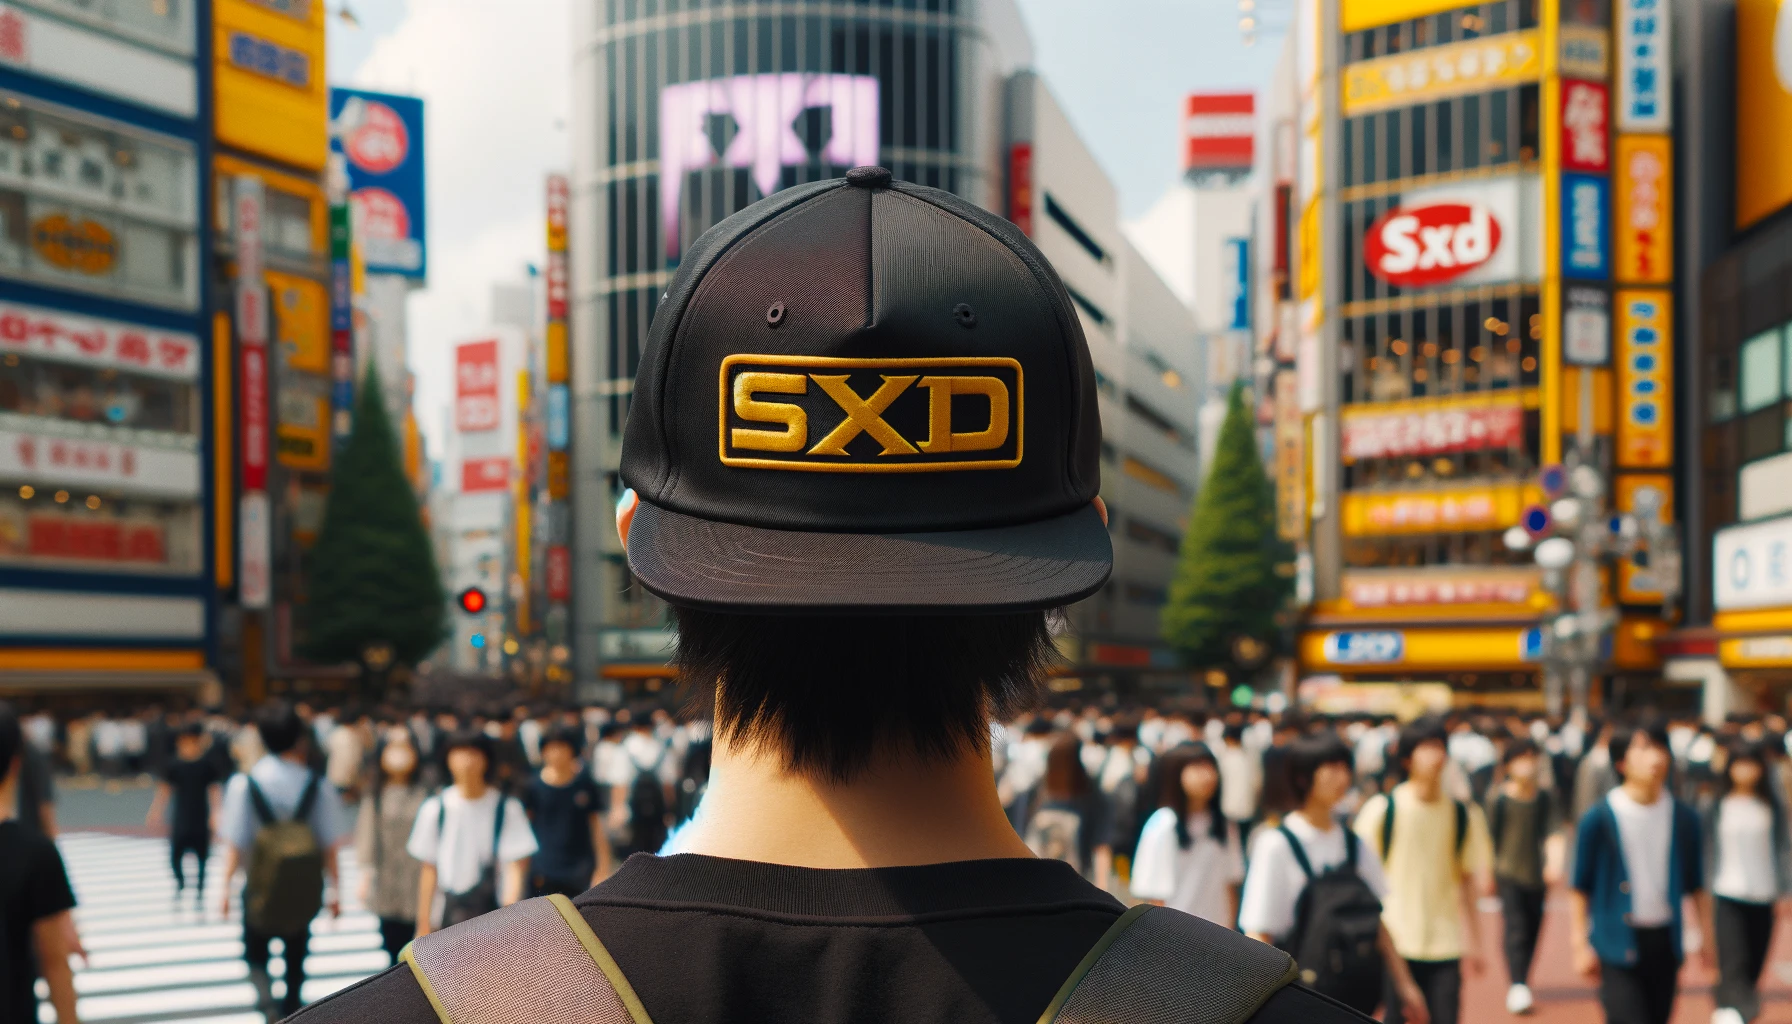 Japanese youth in a busy downtown area wearing a cap featuring a large yellow and black logo in the center, SxD letters included, with the front logo blurred, missing, or not visible. Horizontal aspect ratio (16:9).